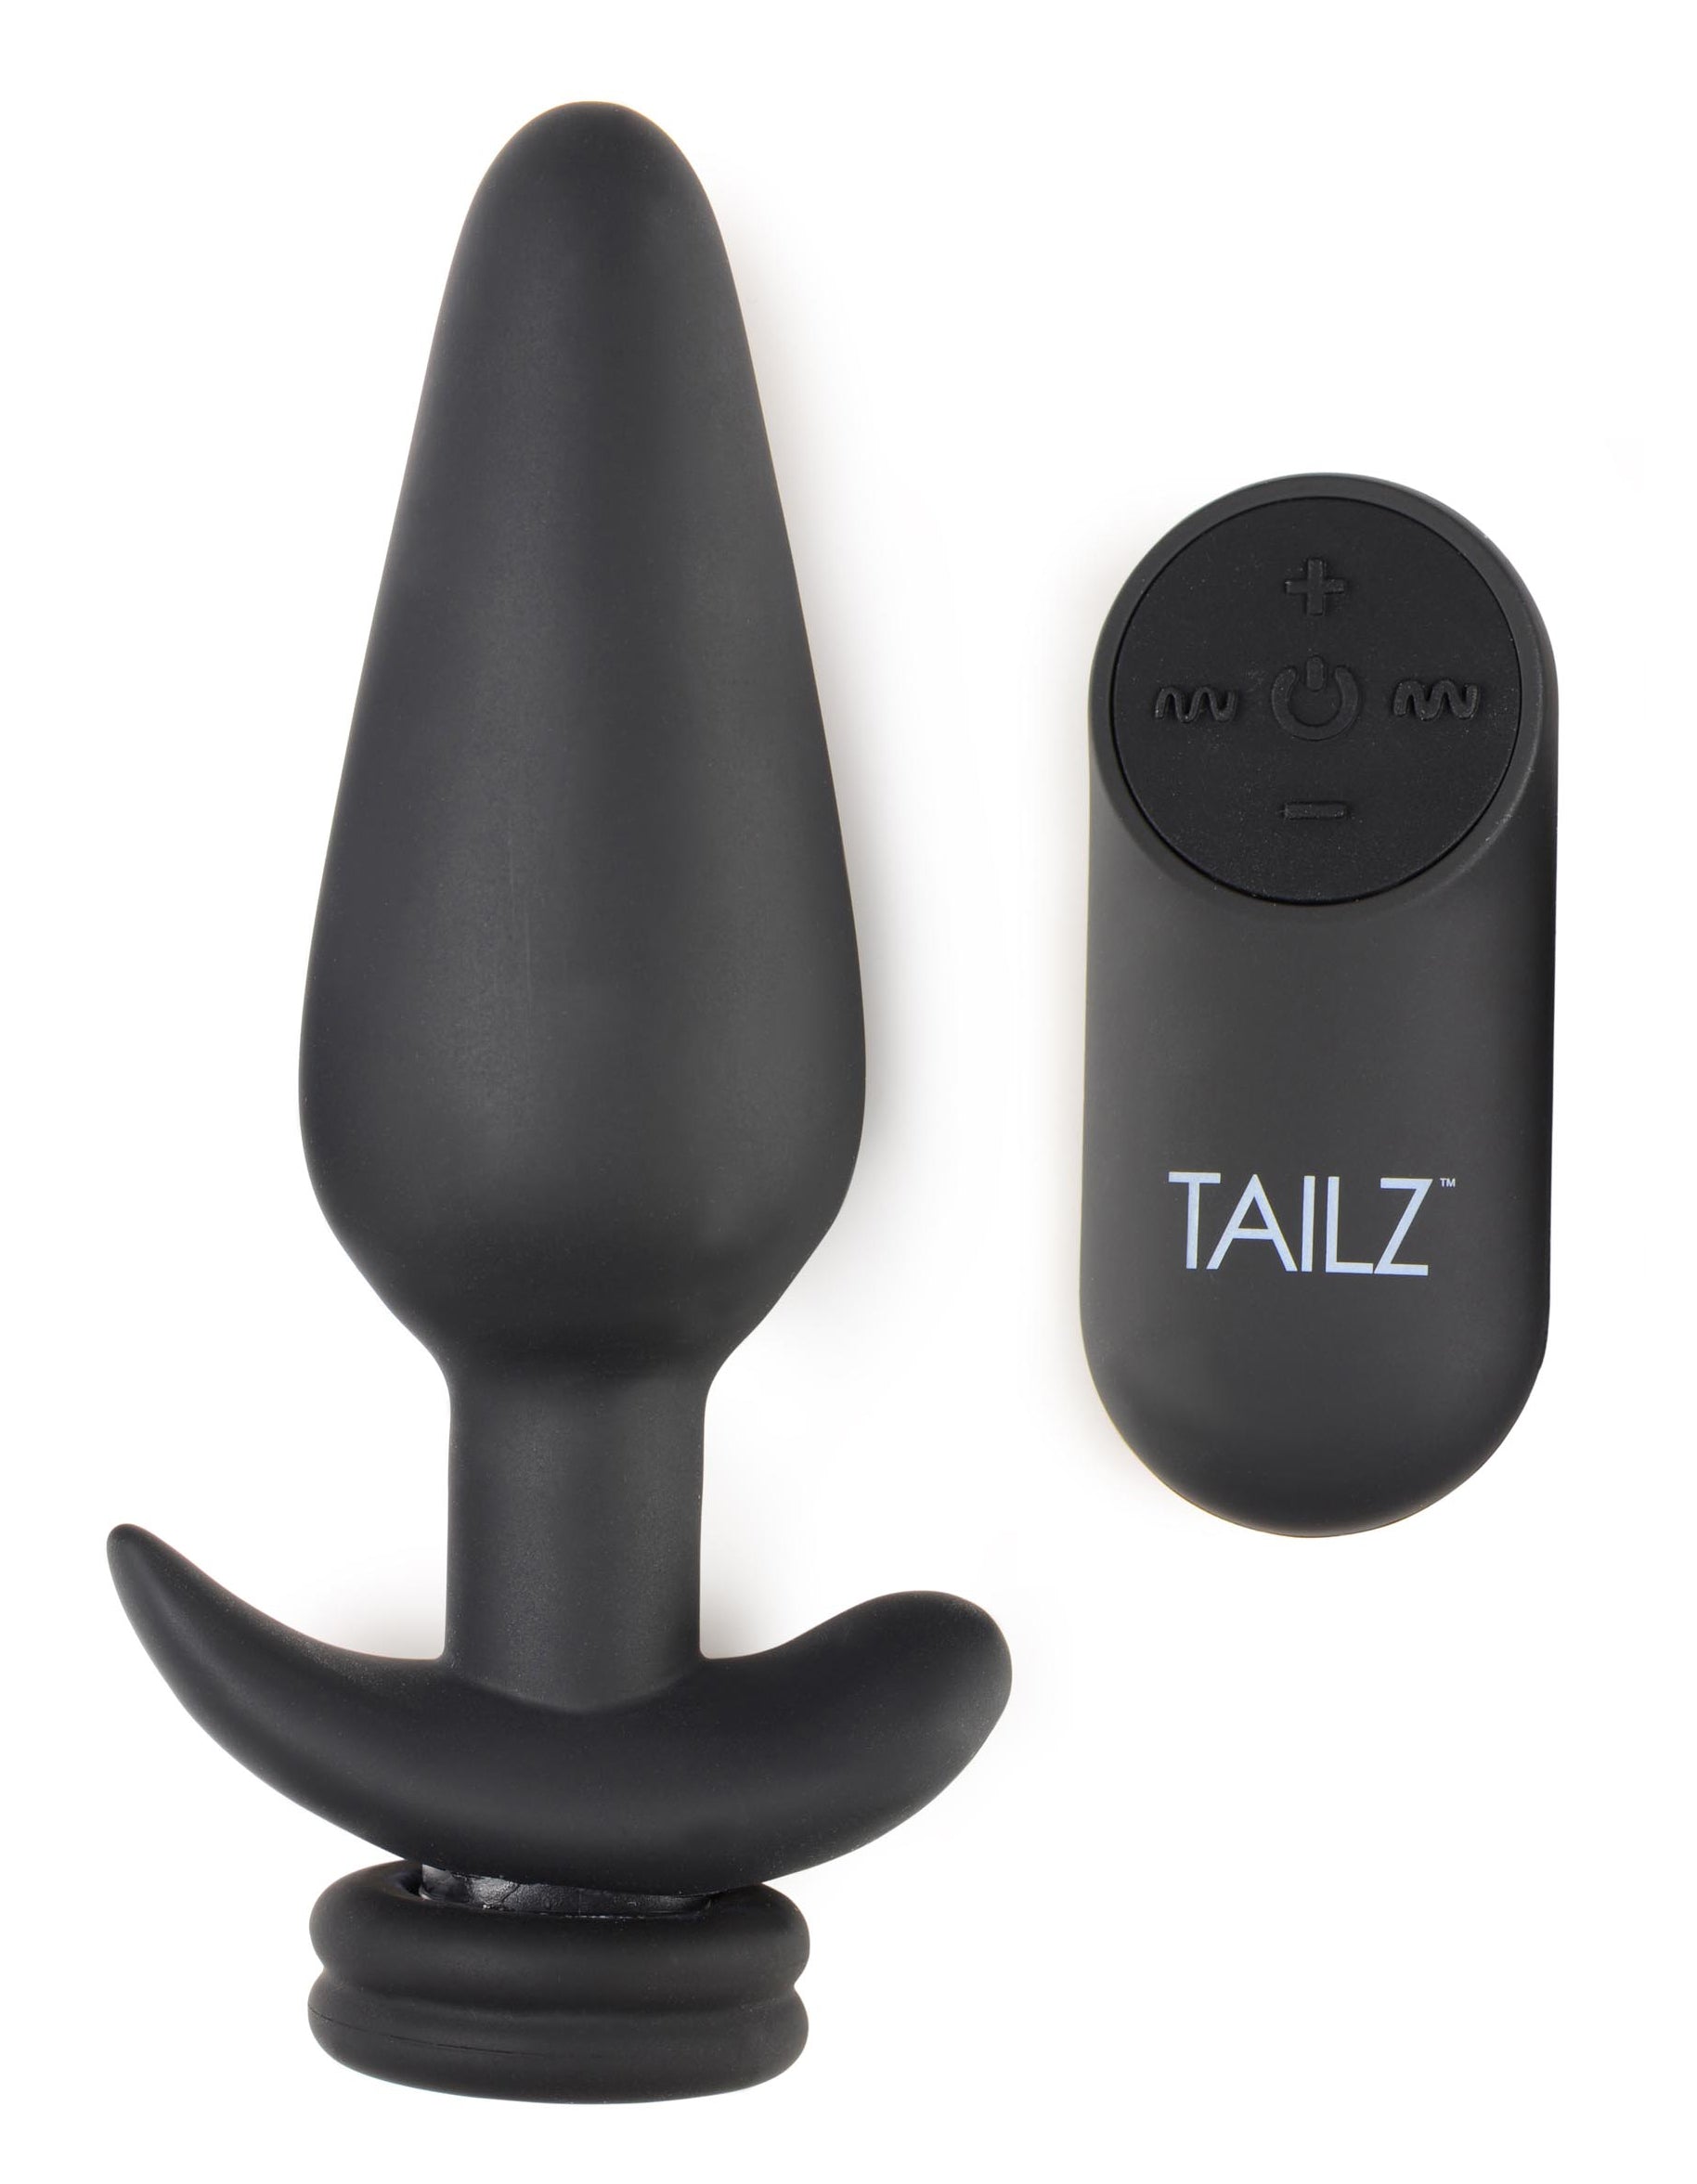 Large Vibrating Anal Plug with Interchangeable Bunny Tail - White - UABDSM